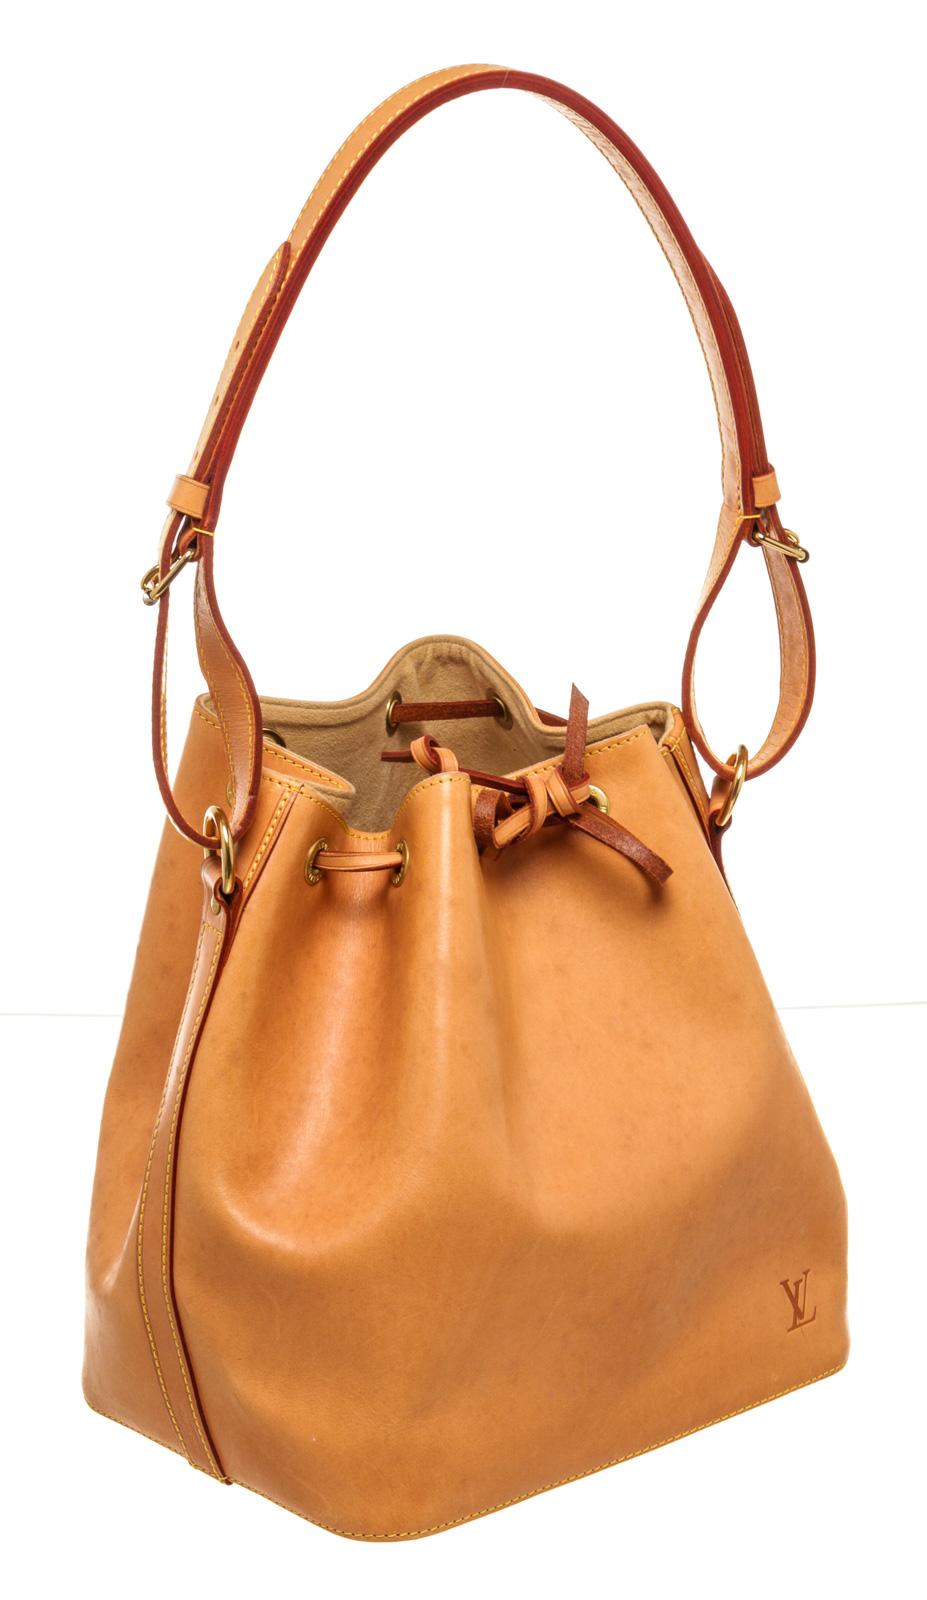 Louis Vuitton Orange Canvas Leather Noe PM Bucket Bag with material epi leather, gold-tone hardware, trim tan vachetta leather, shoulder adjustable strap and drawstring closure.

41542MSC